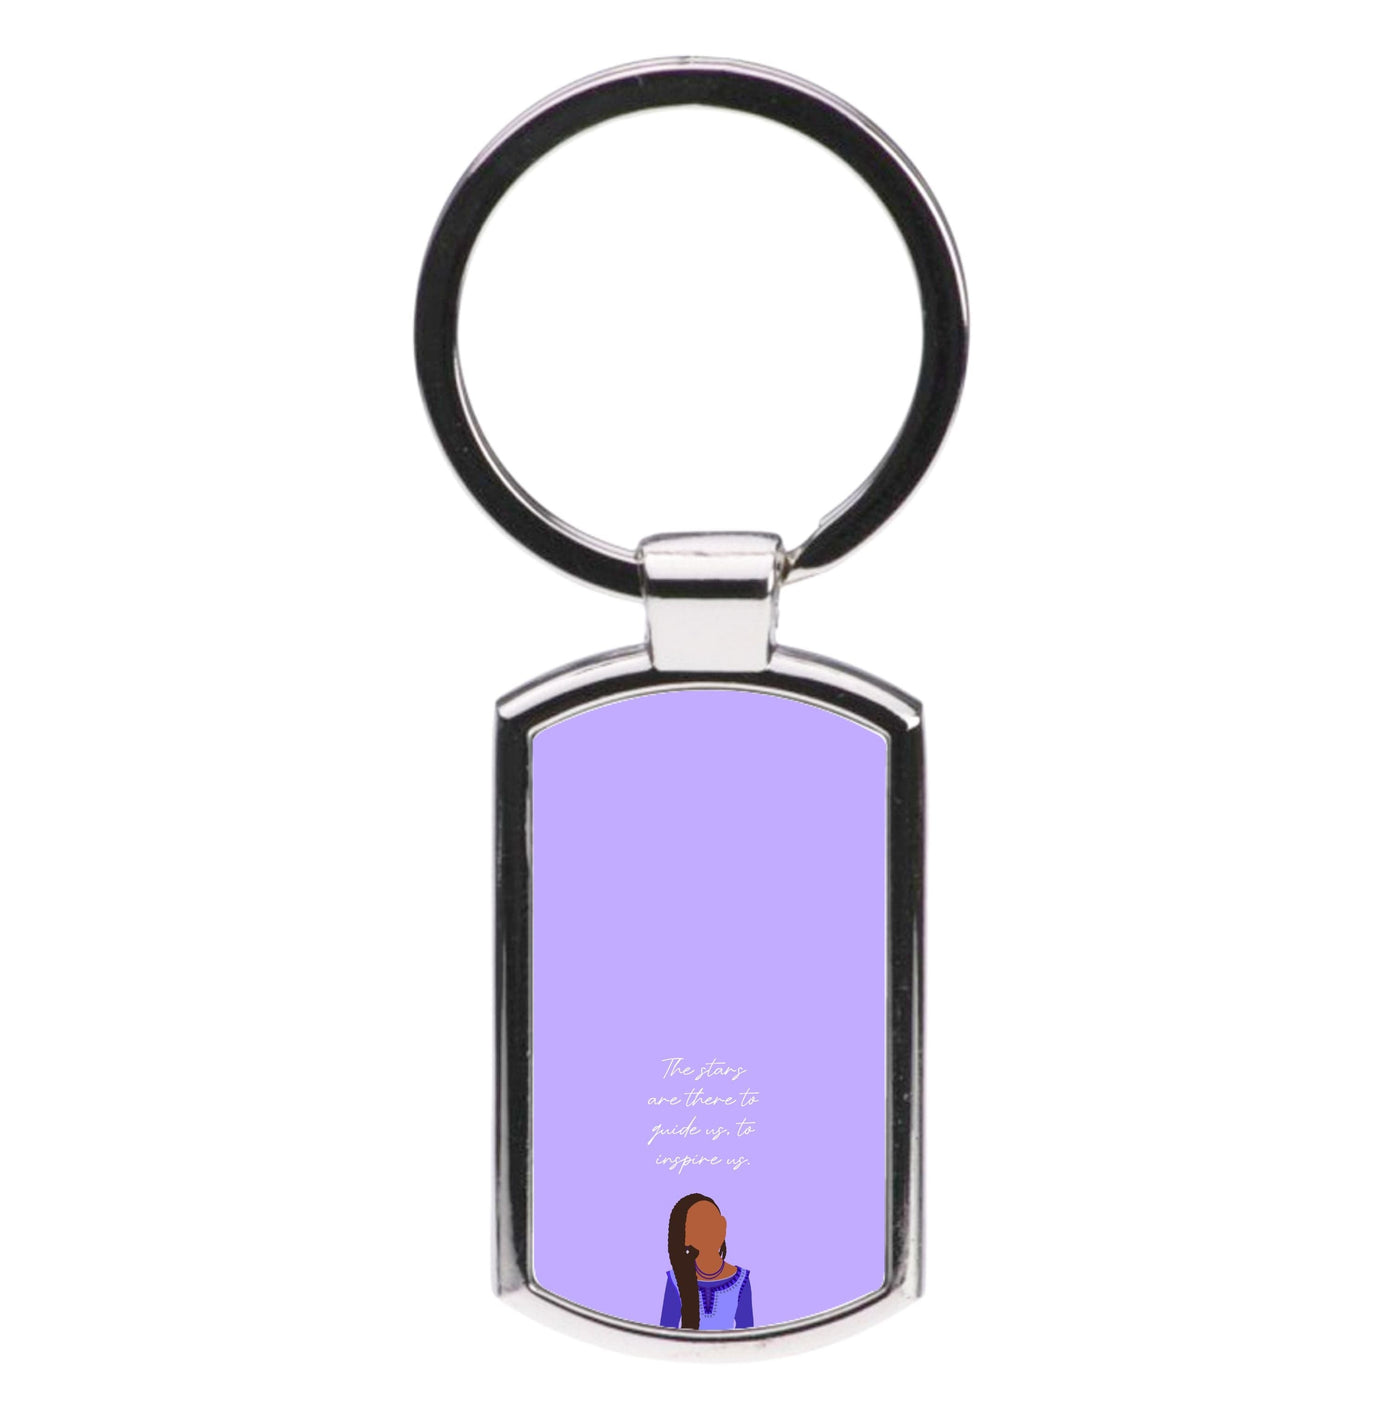 The Stars Are There To Guide Us - Wish Luxury Keyring